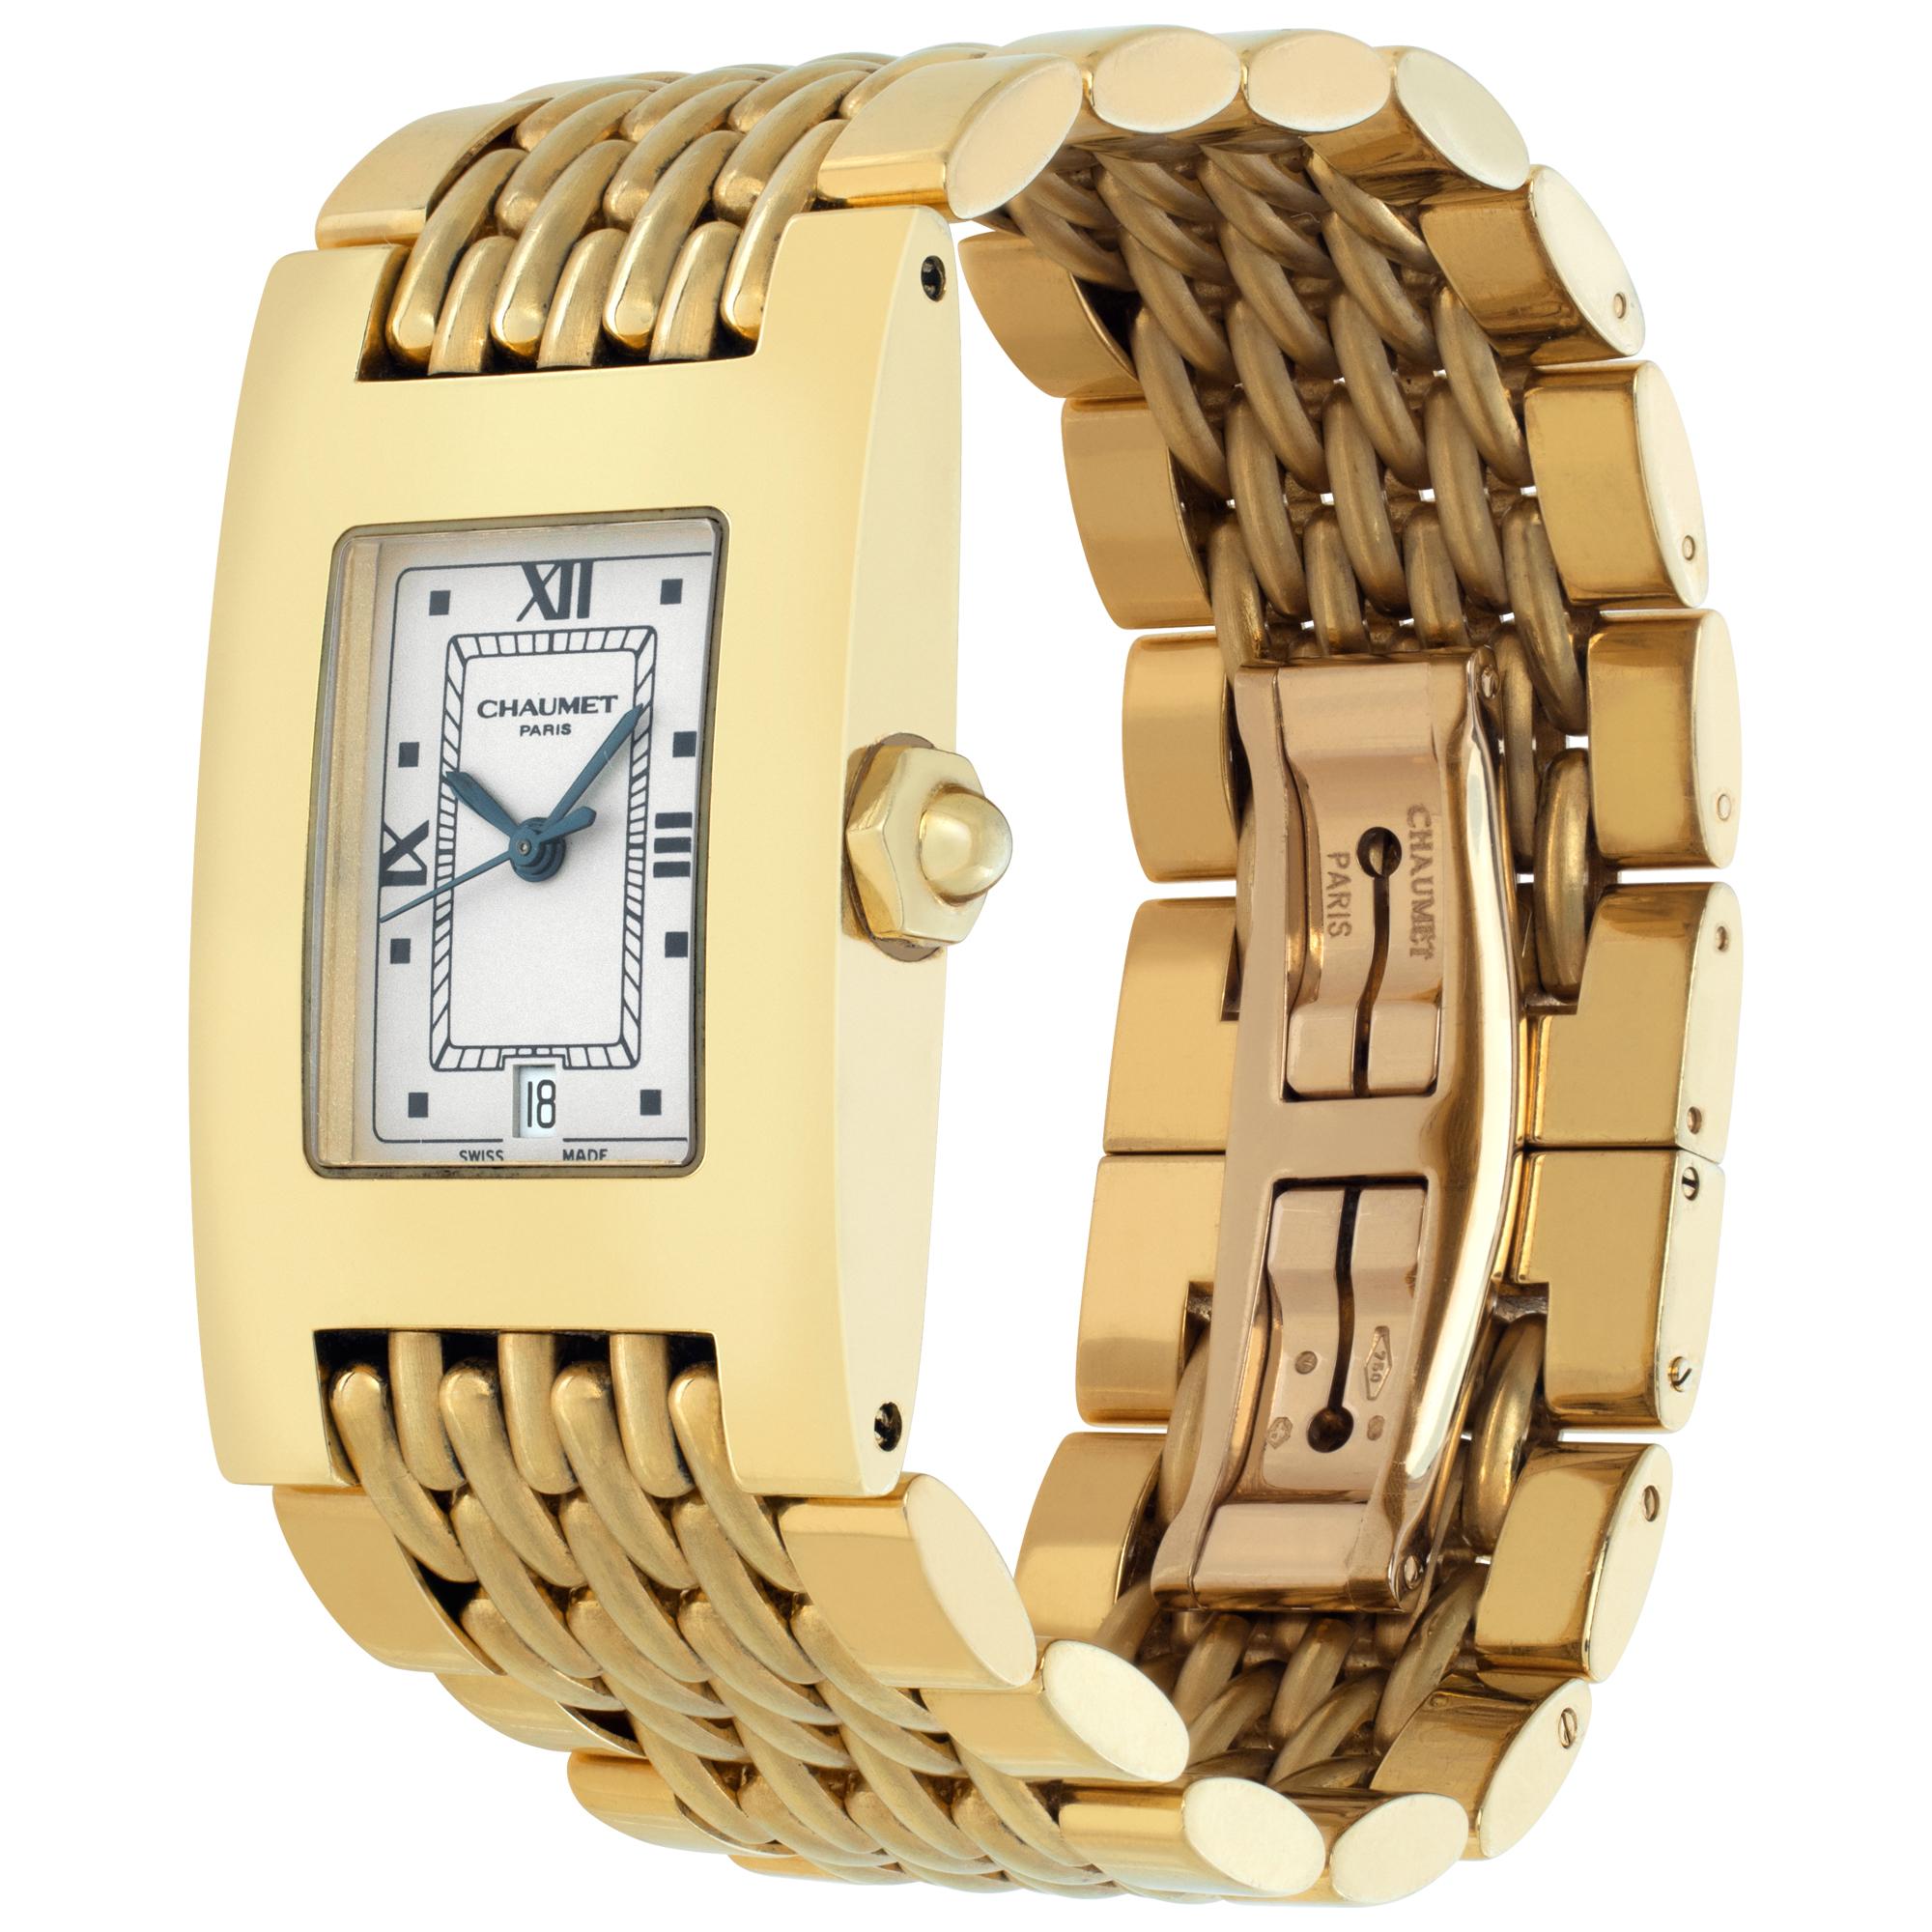 Chaumet in 18k yellow gold. Quartz w/ sweep seconds and date. 37 mm length (lug to lug) by 23 mm width case size. 7 inch length. Fine Pre-owned Chaumet Watch. Certified preowned Classic Chaumet Classic watch is made out of yellow gold on a 18k